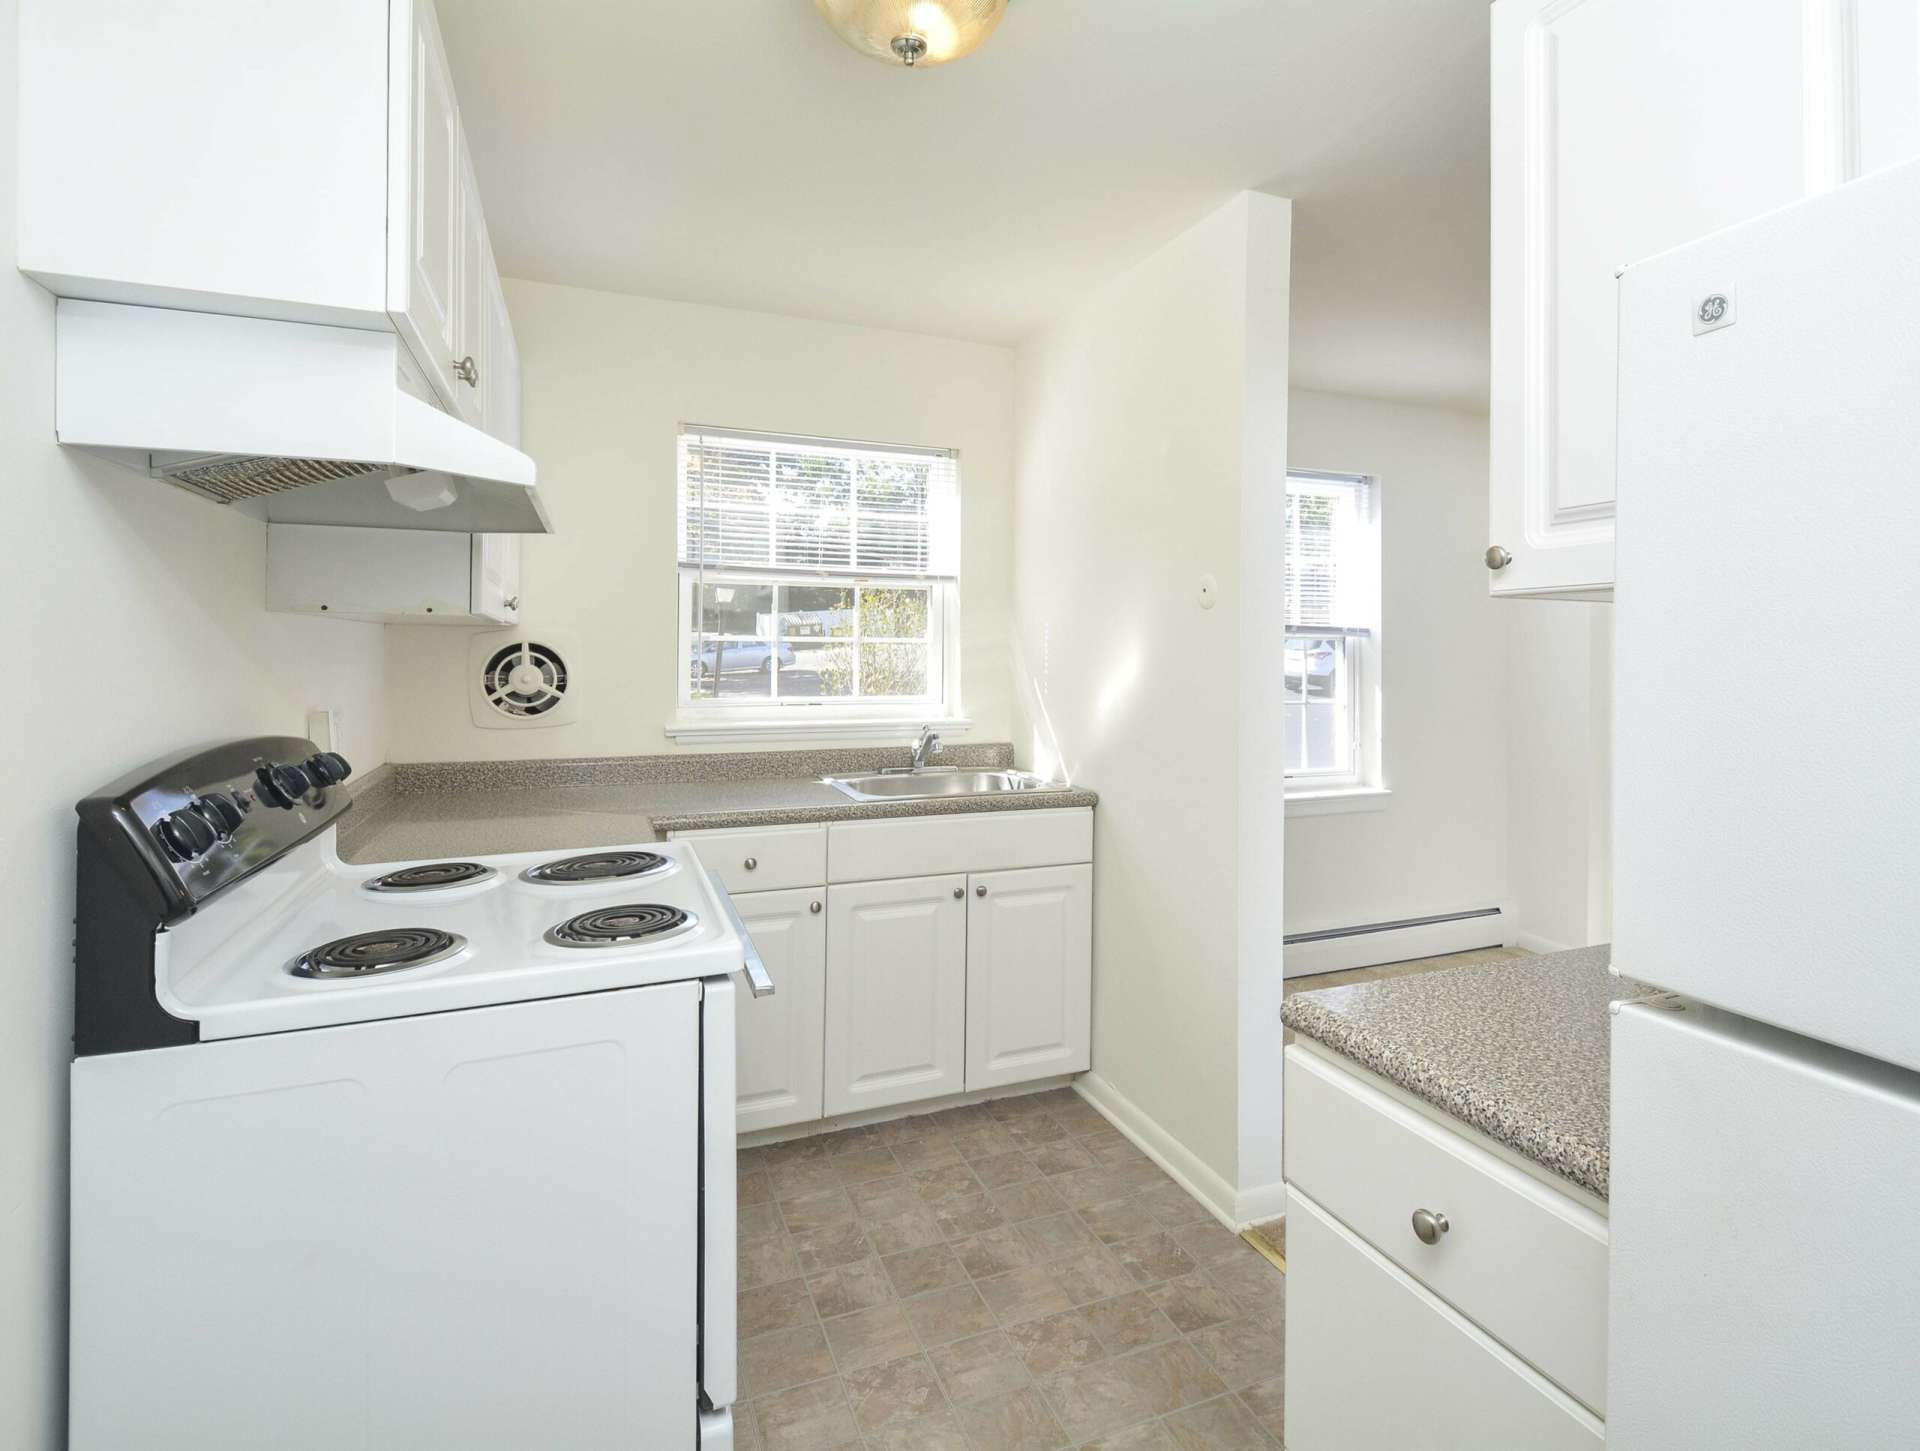 Kitchen with white appliances and white cabinets next to the living room area.